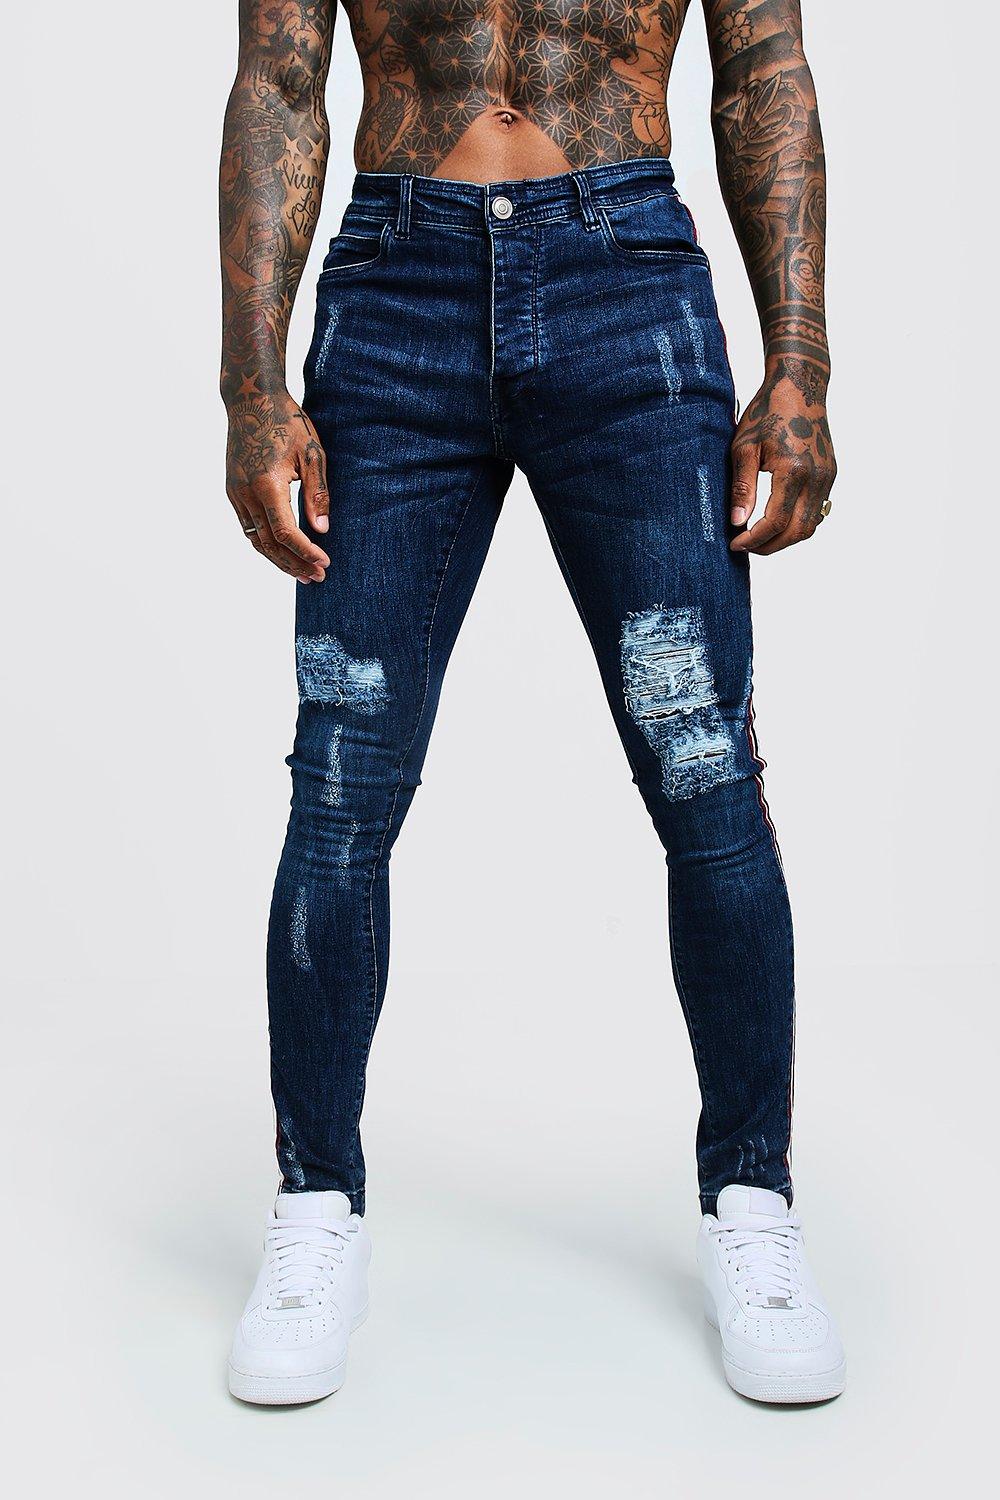 blue distressed jeans